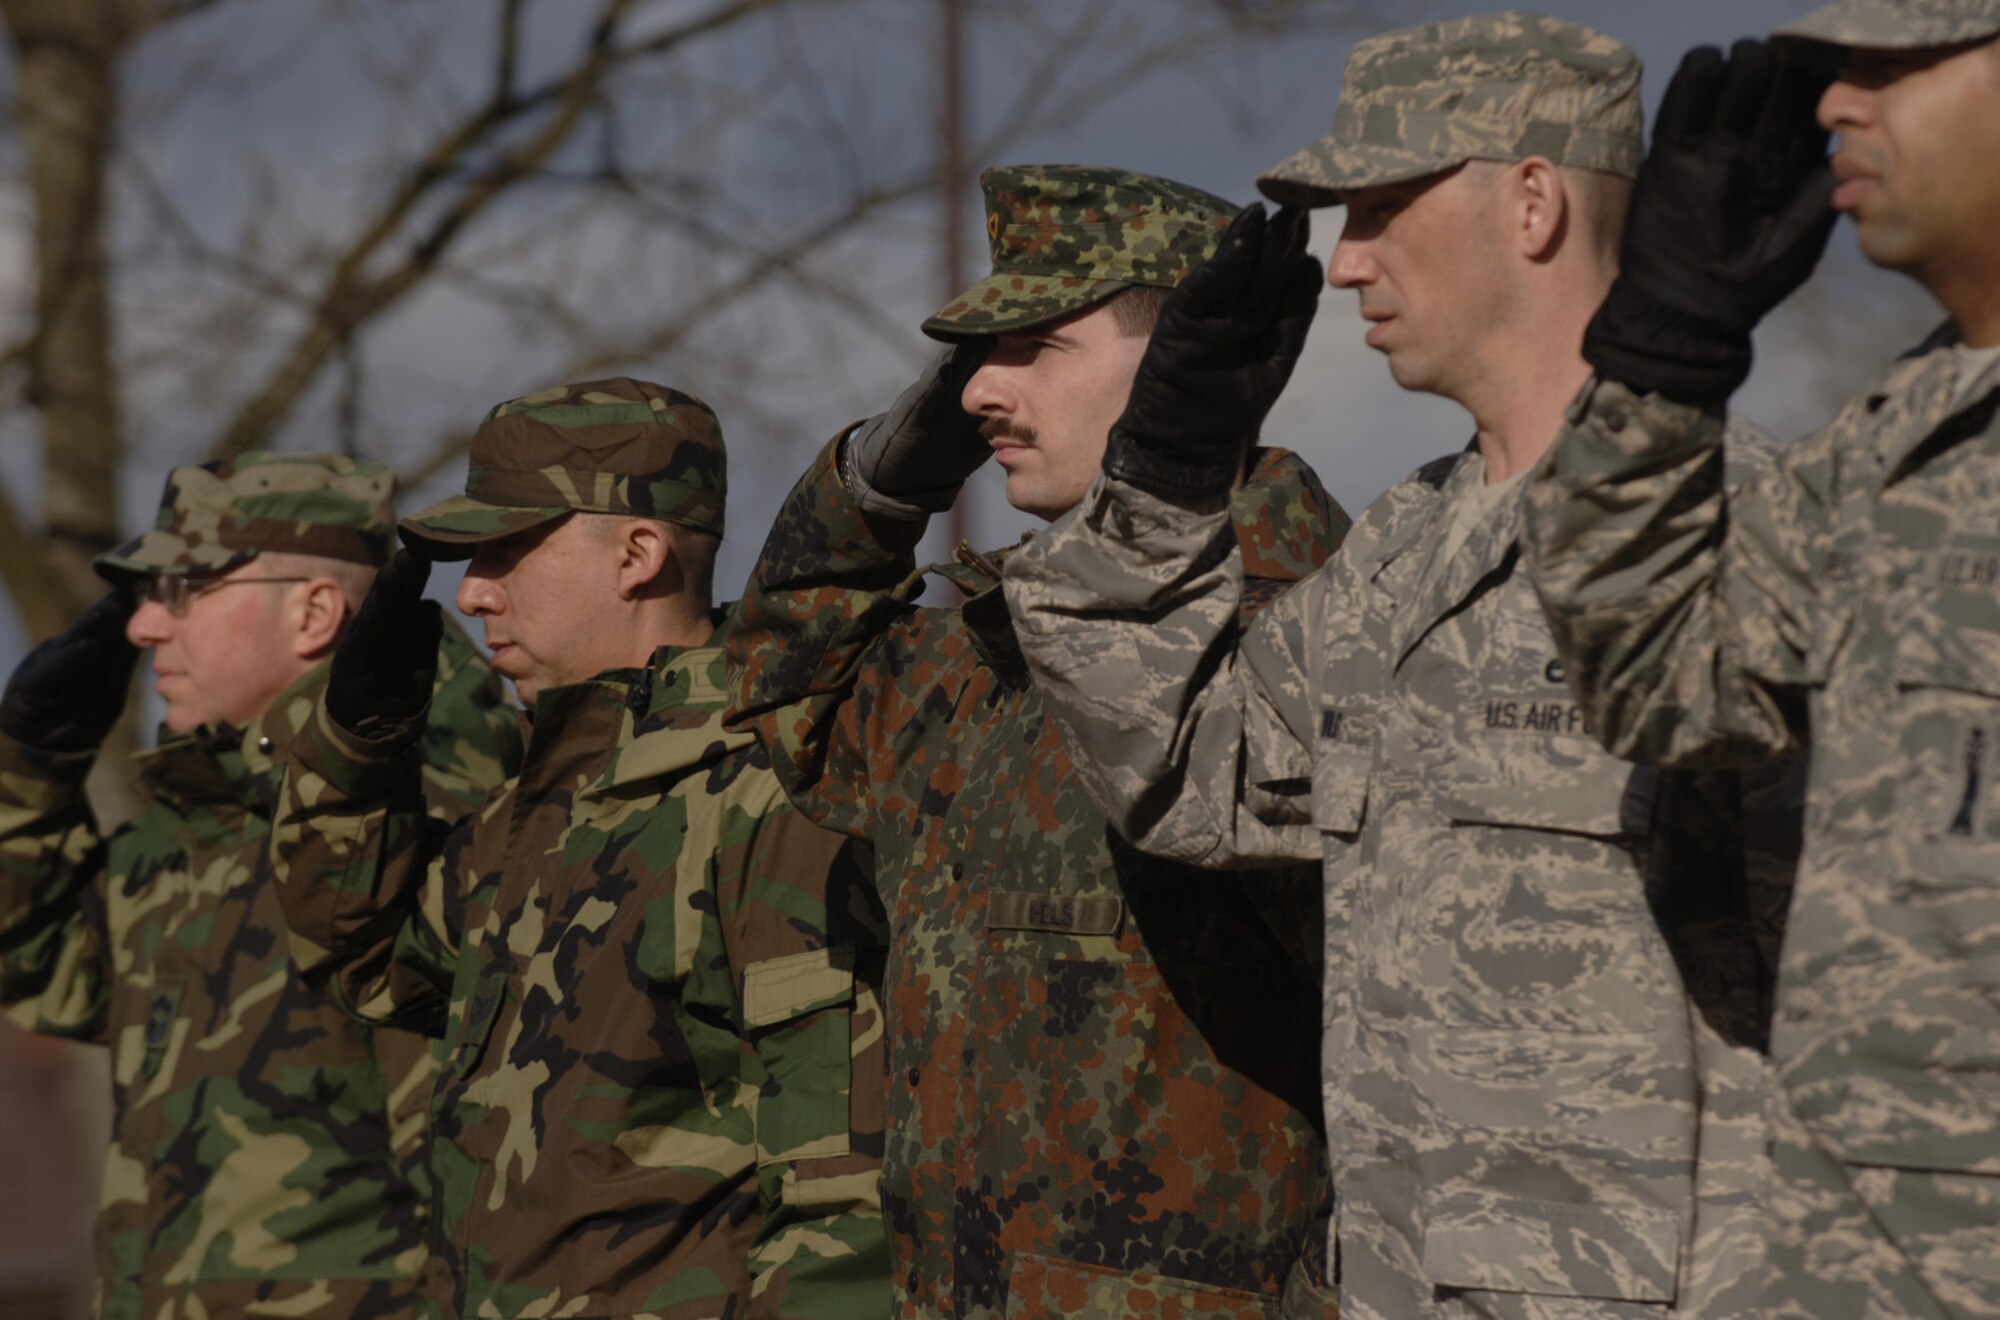 German Air Force Master Sgt. Holger Fels stands with Kisling Noncommissioned Officer Academy instructors during a retreat ceremony at Kapaun Air Station, Germany. Sergeant Fels, a German NCO Academy instructor in Appen, Germany, voluntarily enrolled in the six-week academy course designed for U.S. Air Force technical sergeants to prepare for a four-year special duty assignment as an exchange instructor at the Senior NCO Academy at Maxwell Air Force Base, Alabama. Photo by Master Sgt. Scott Wagers 